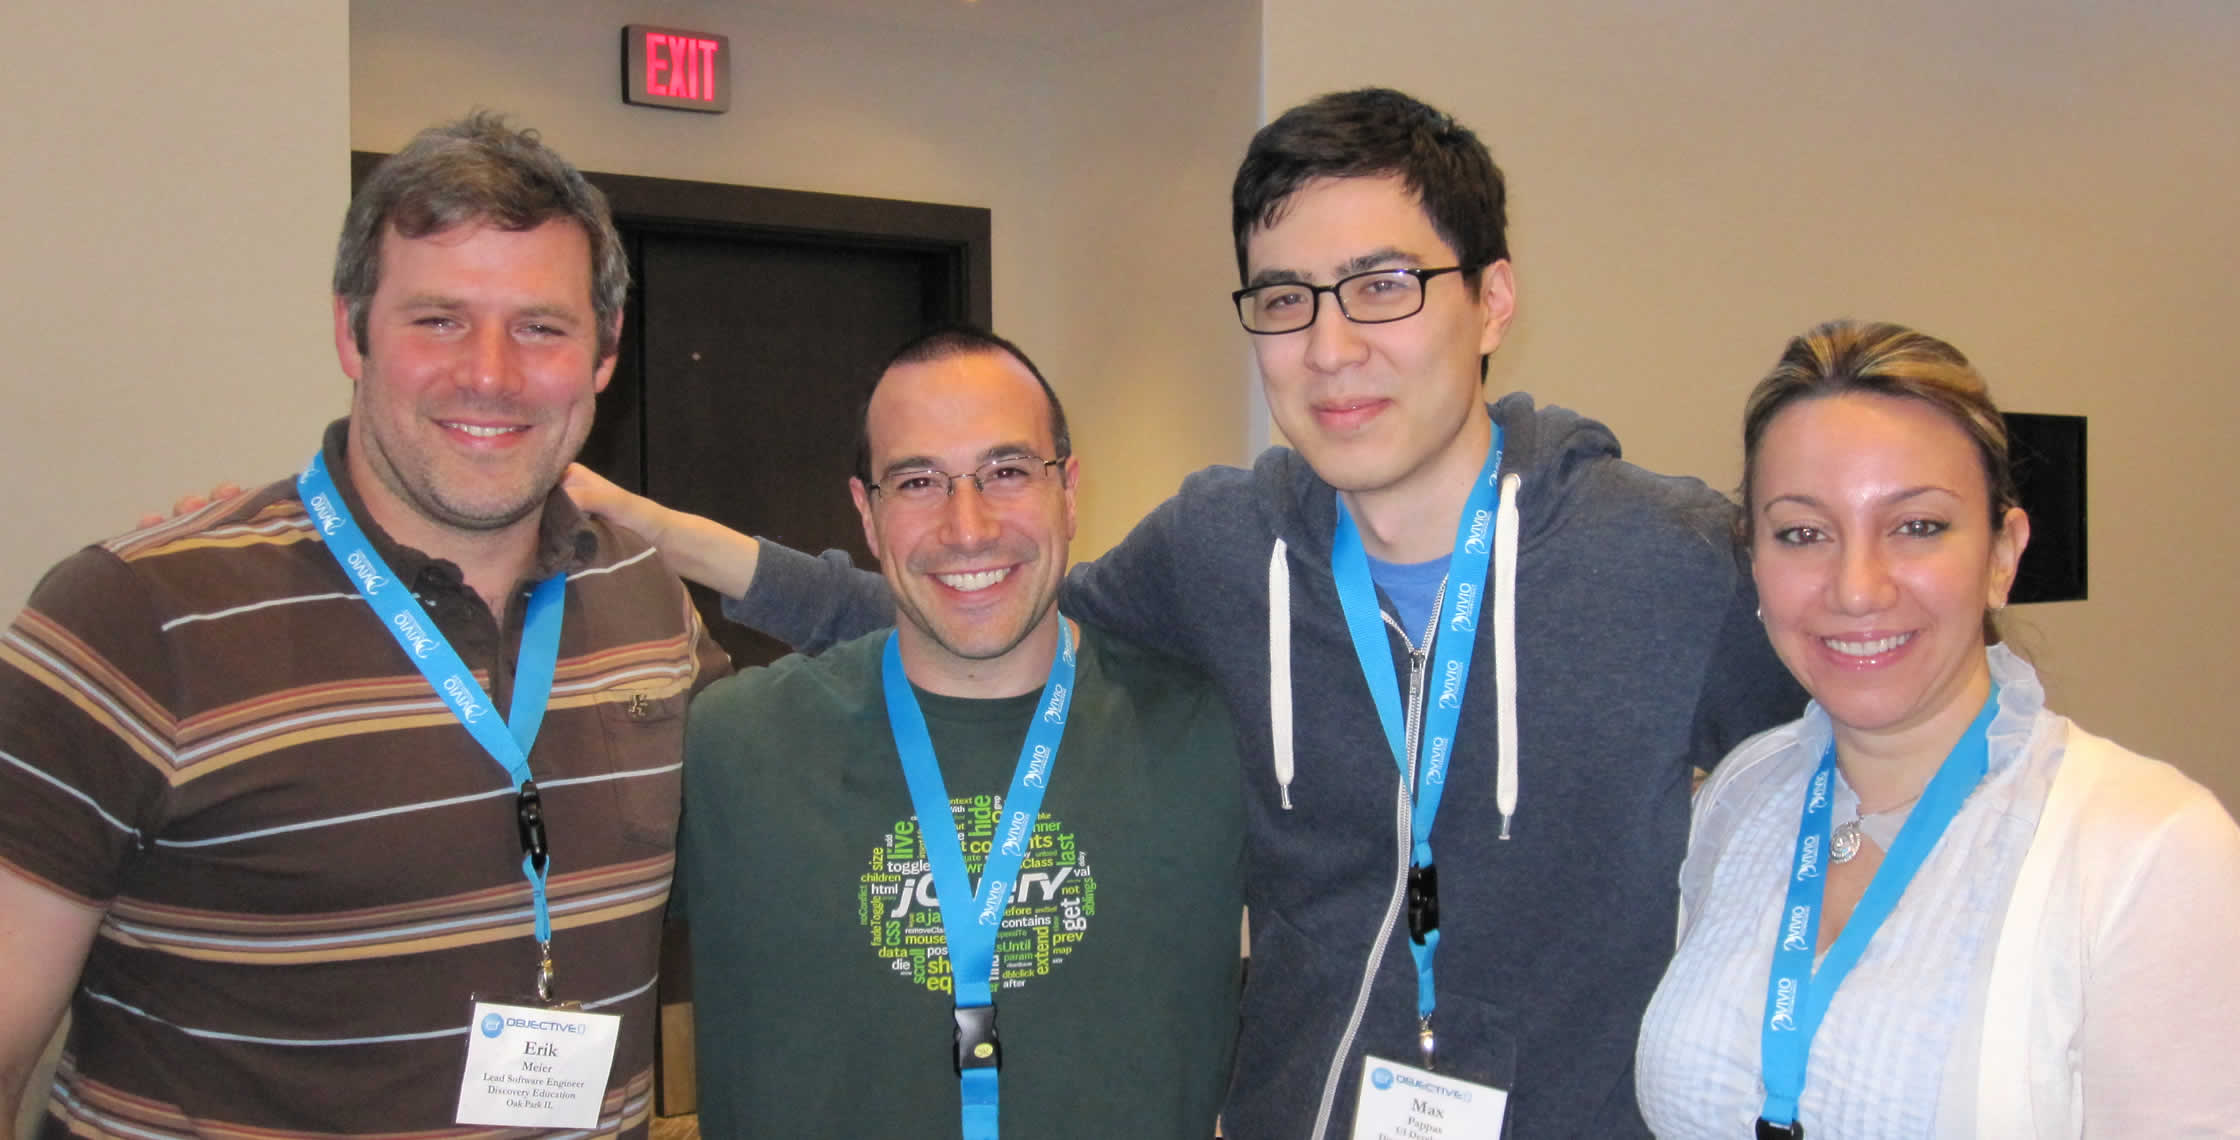 Ben Nadel at cf.Objective() 2013 (Bloomington, MN) with: Erik Meier, Max Pappas, and Reem Jaghlit